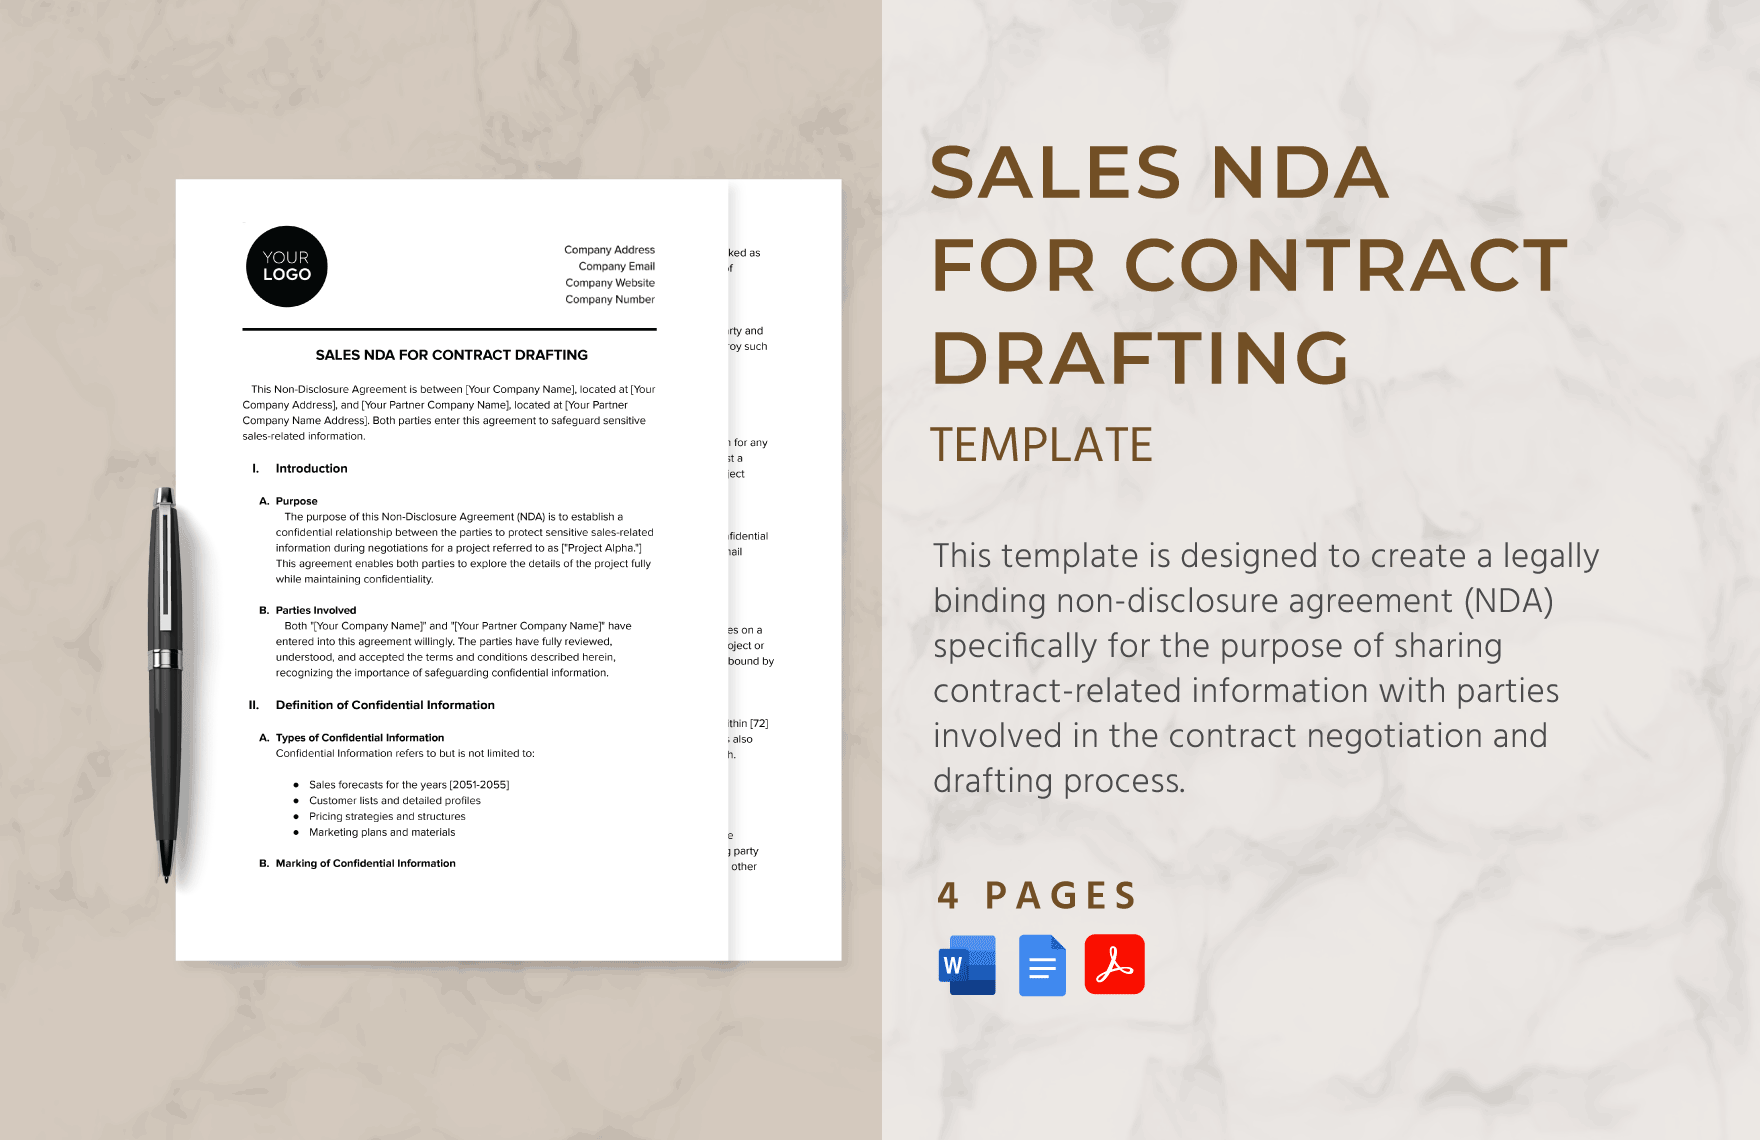 Sales NDA for Contract Drafting Template